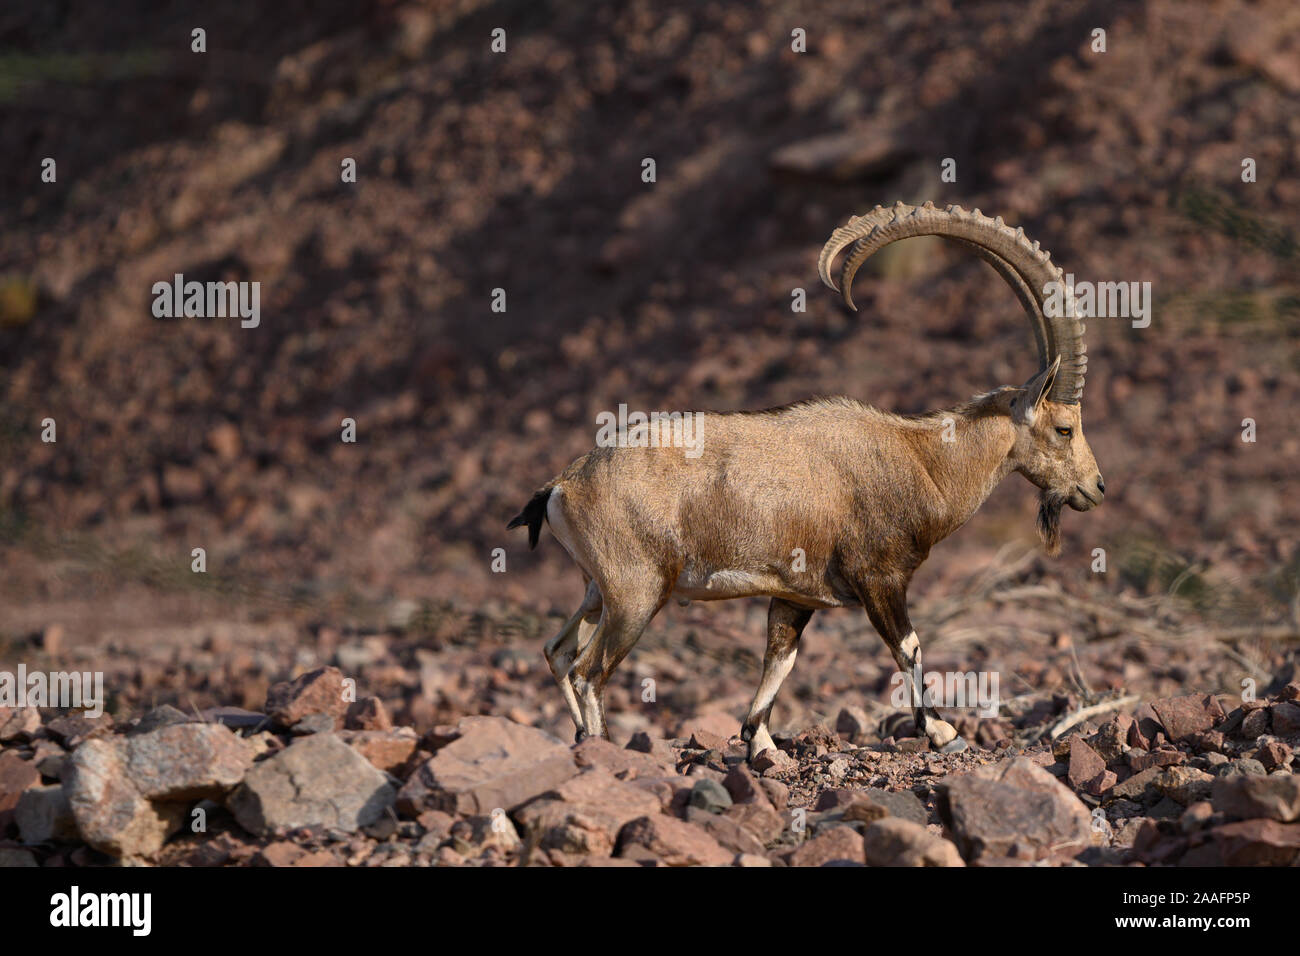 Nubian ibex capra beautiful goat mammal spotted outdoor in the arid wildlife area of Timna in Israel. Stock Photo